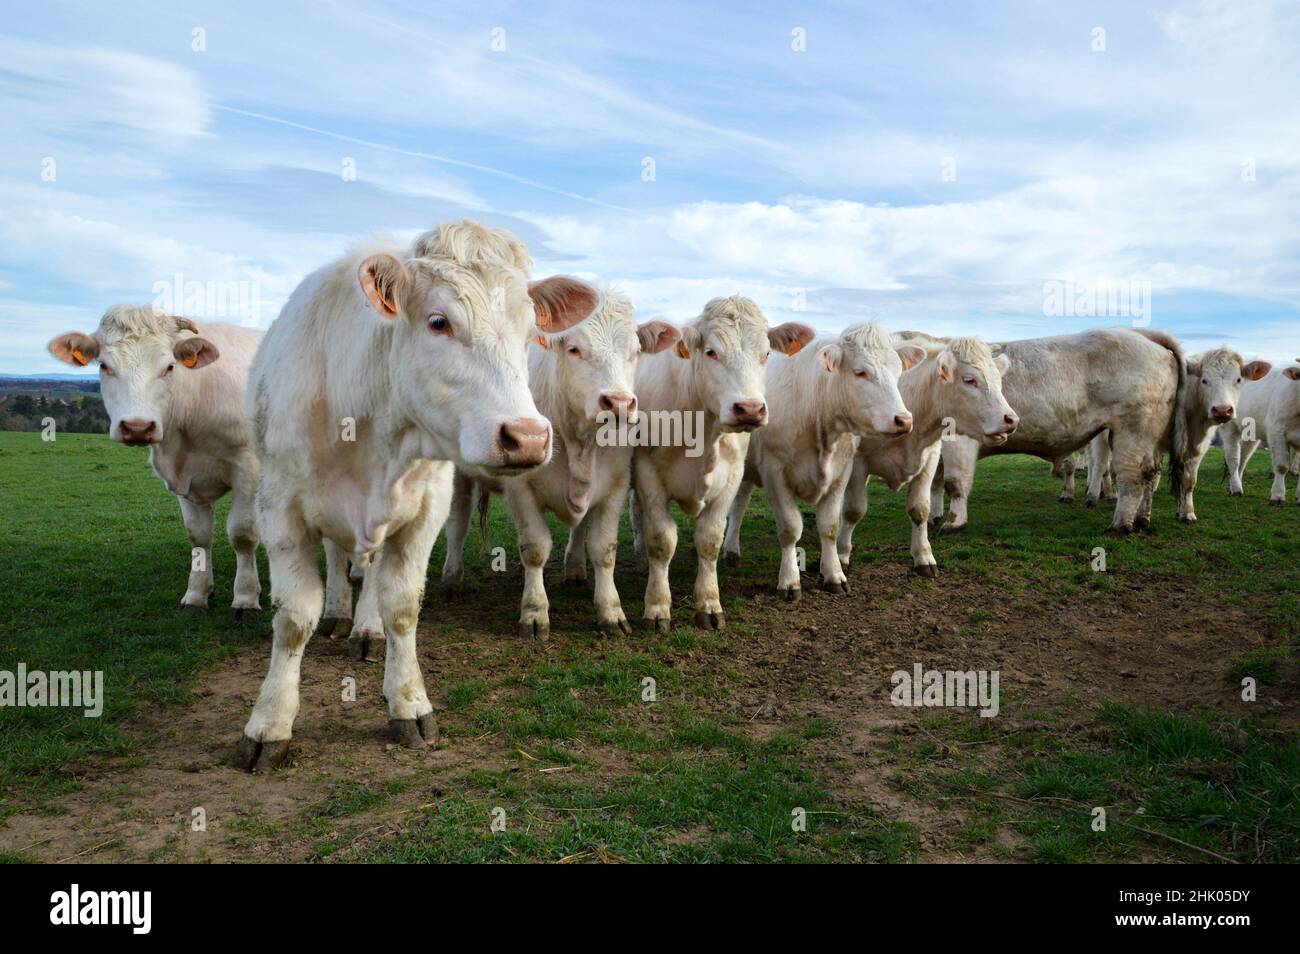 A herd of Charolais cows in a field, in the countryside. Stock Photo